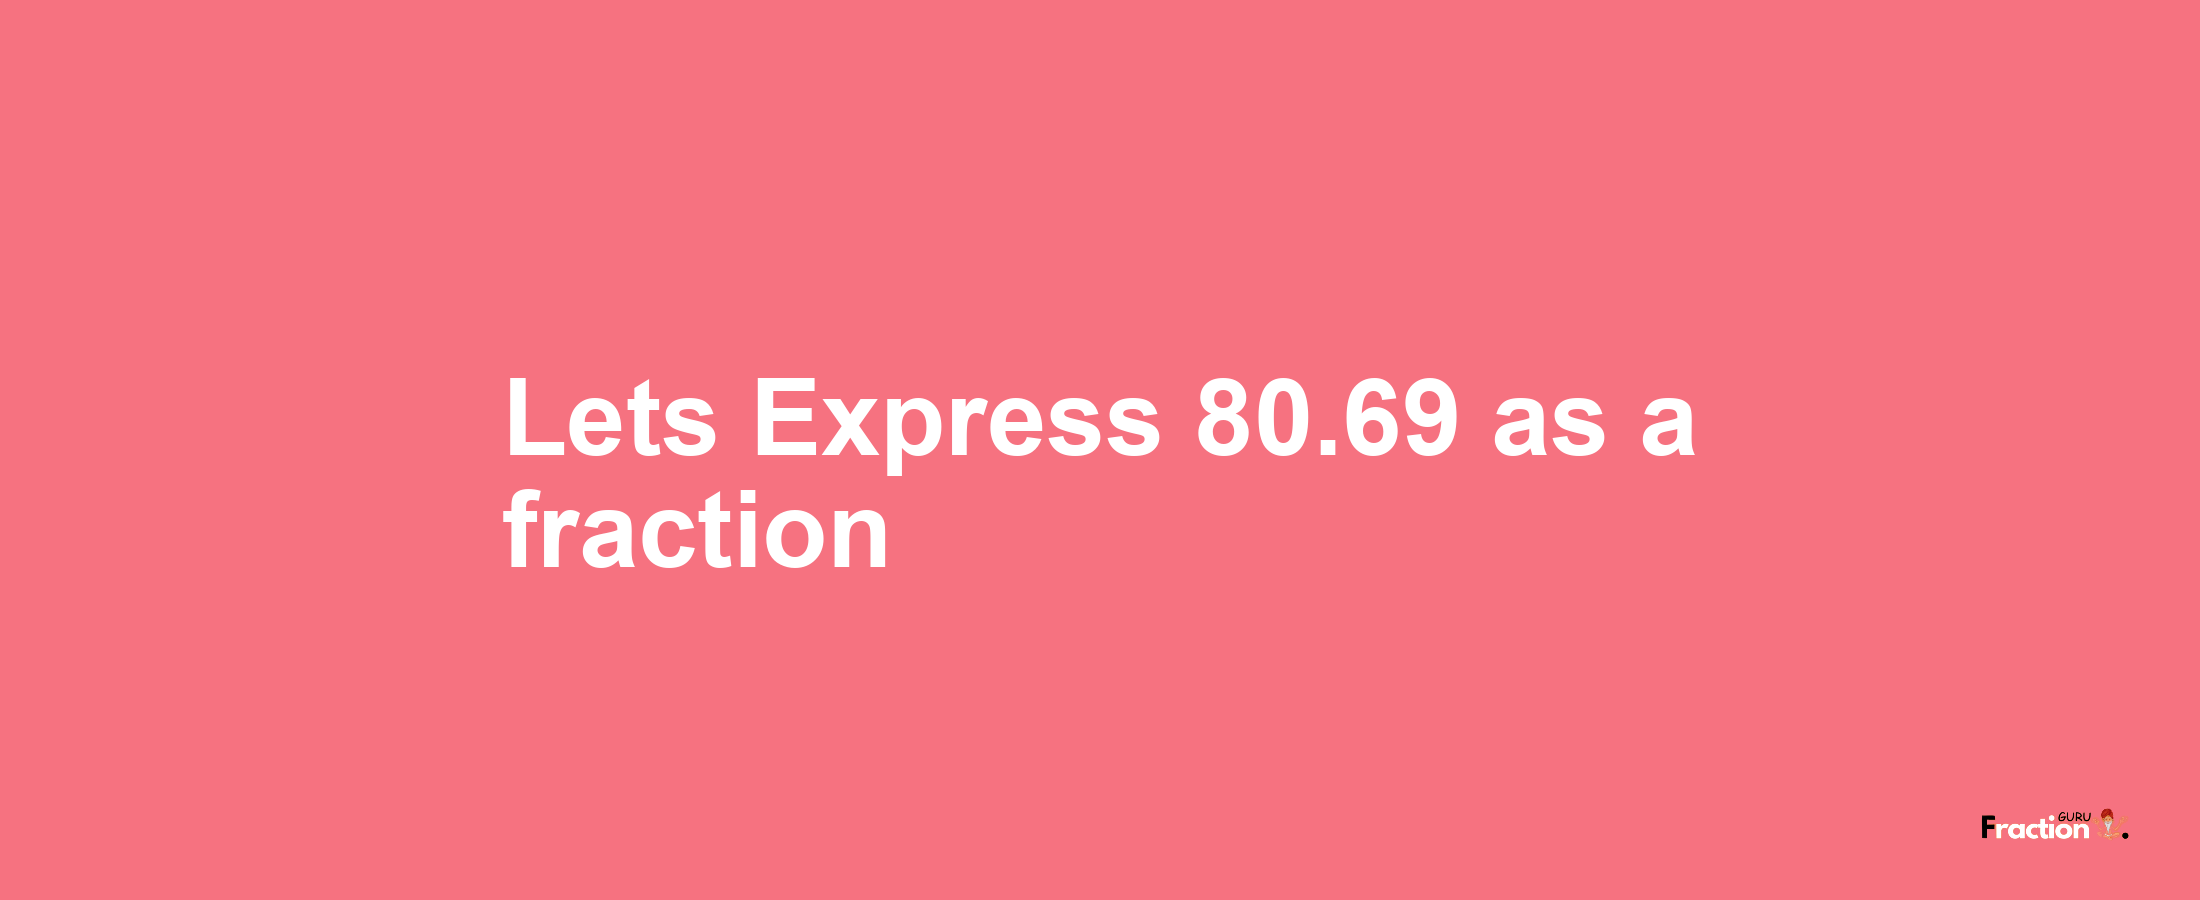 Lets Express 80.69 as afraction